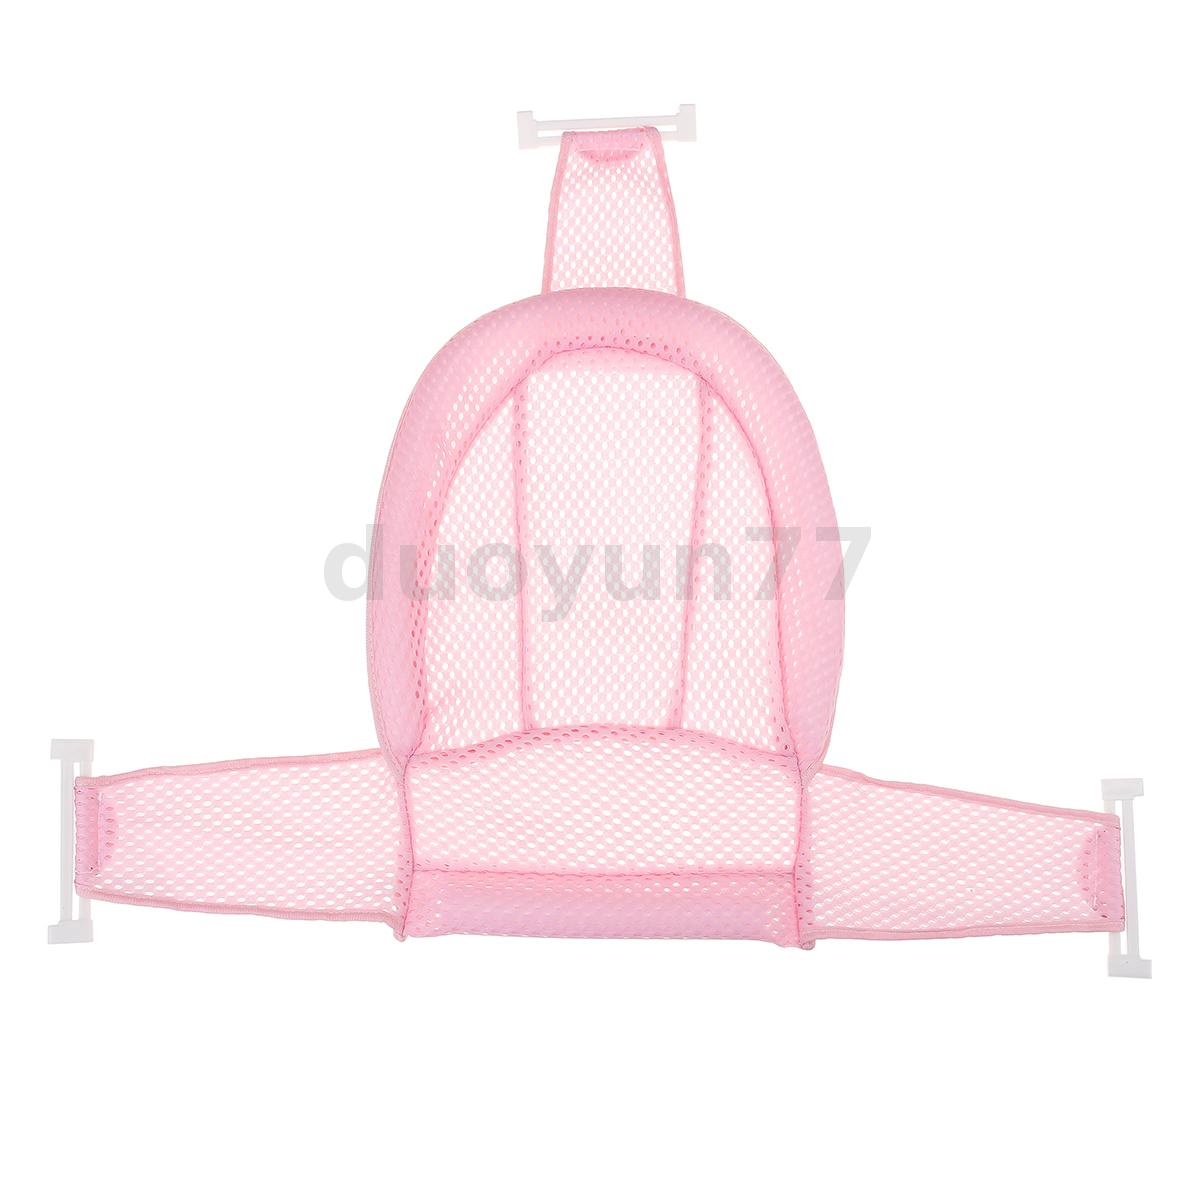 Details about   Adjustable Baby Bath Seat Safety Bathtub Bathing Shower Support Fold Net  @ 